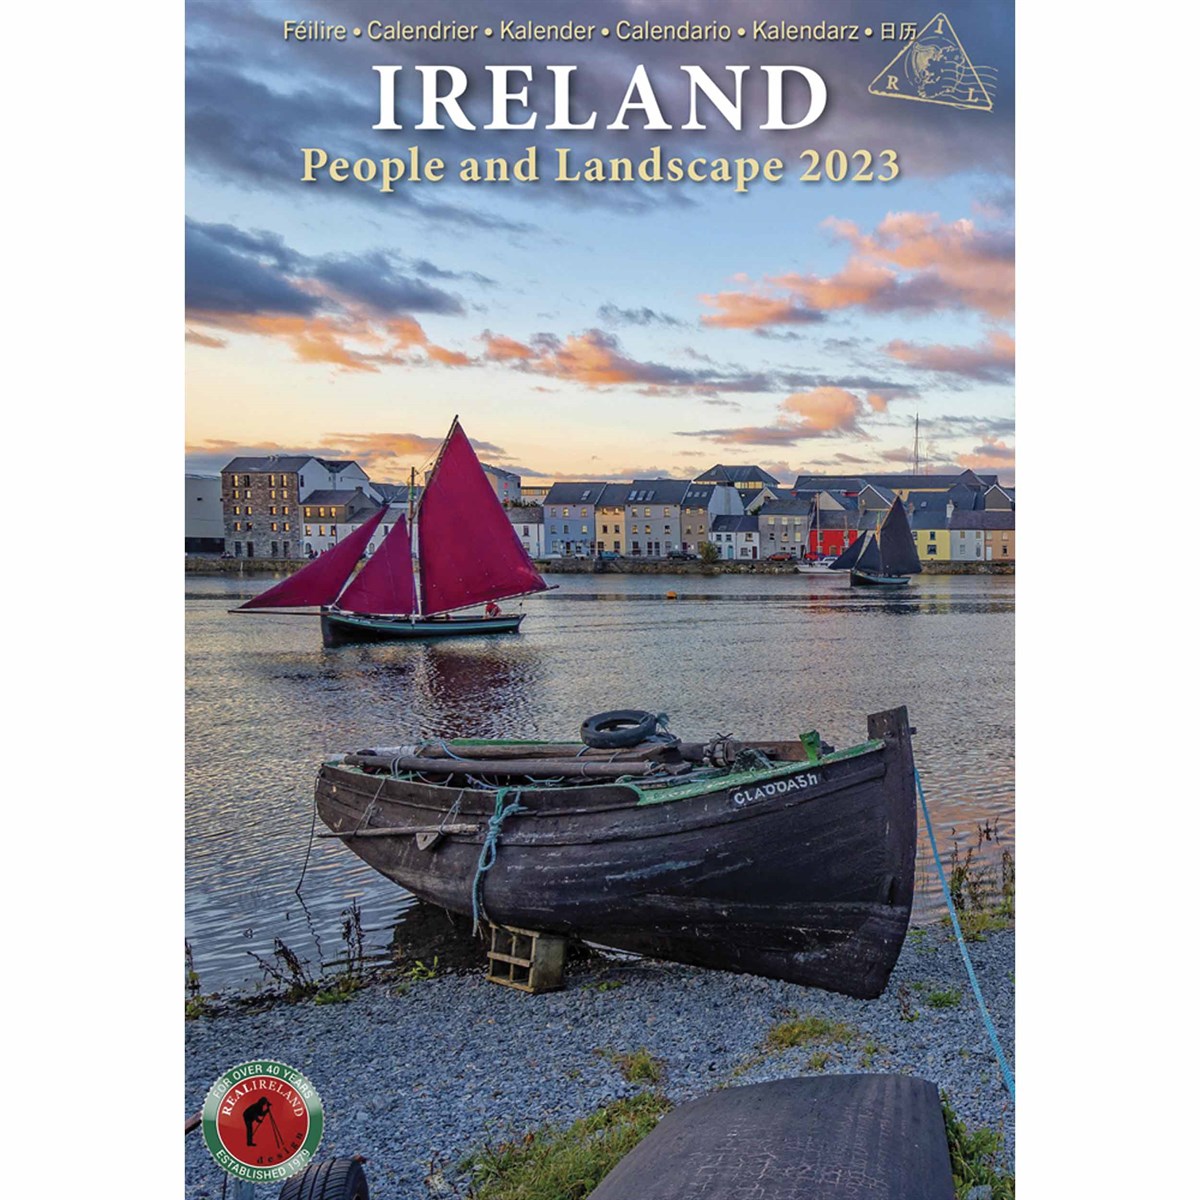 Ireland, People and Landscape A5 2023 Calendars